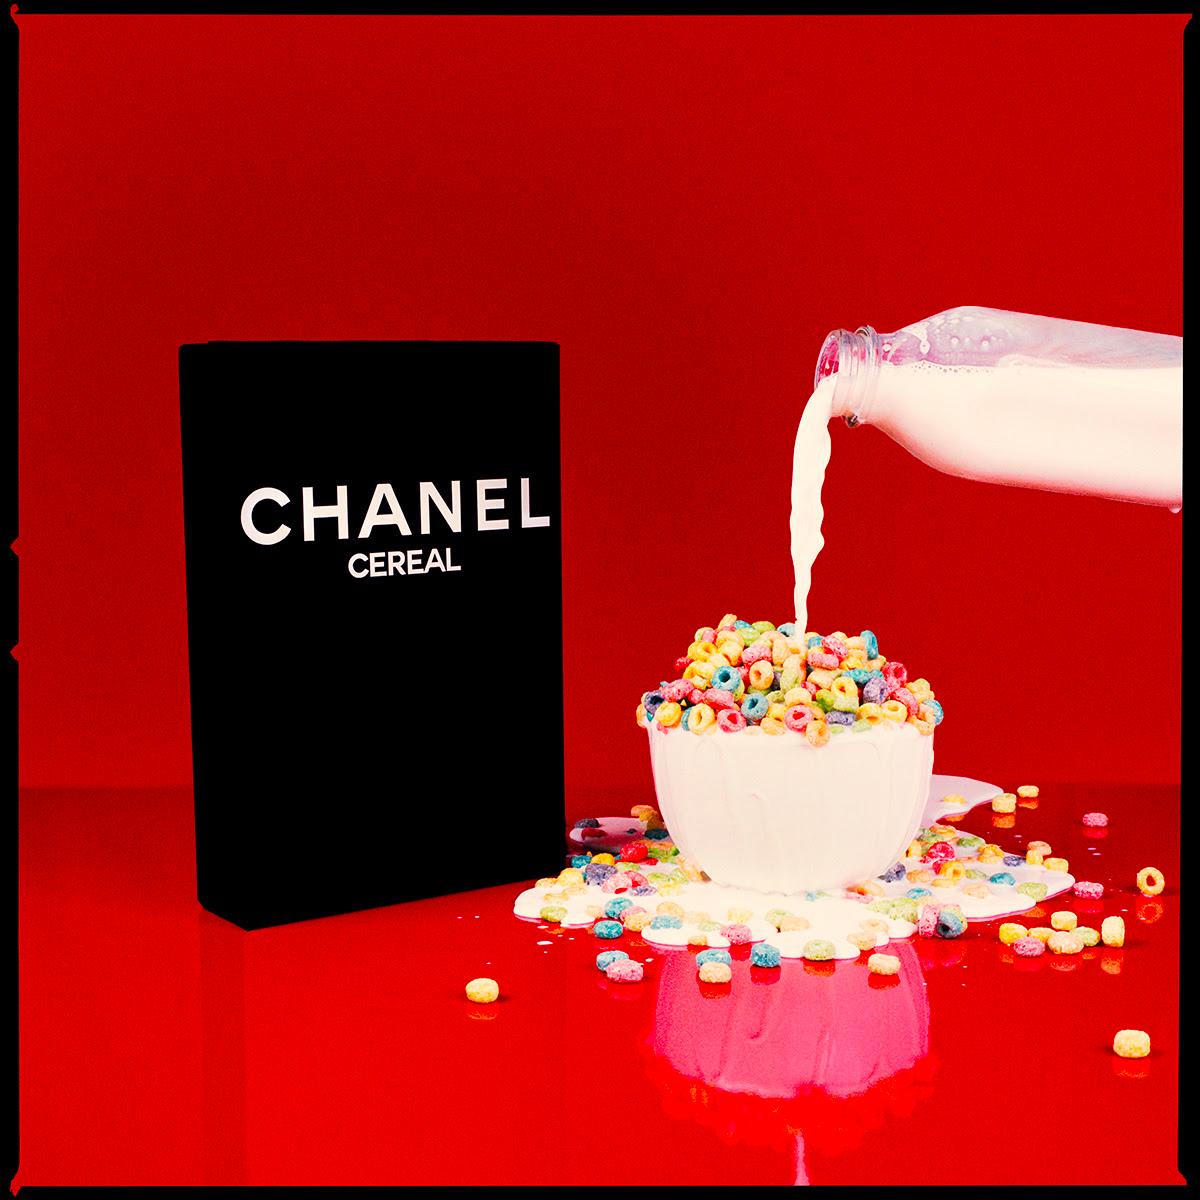 Tyler Shields - Chanel Cereal II, Photography 2021